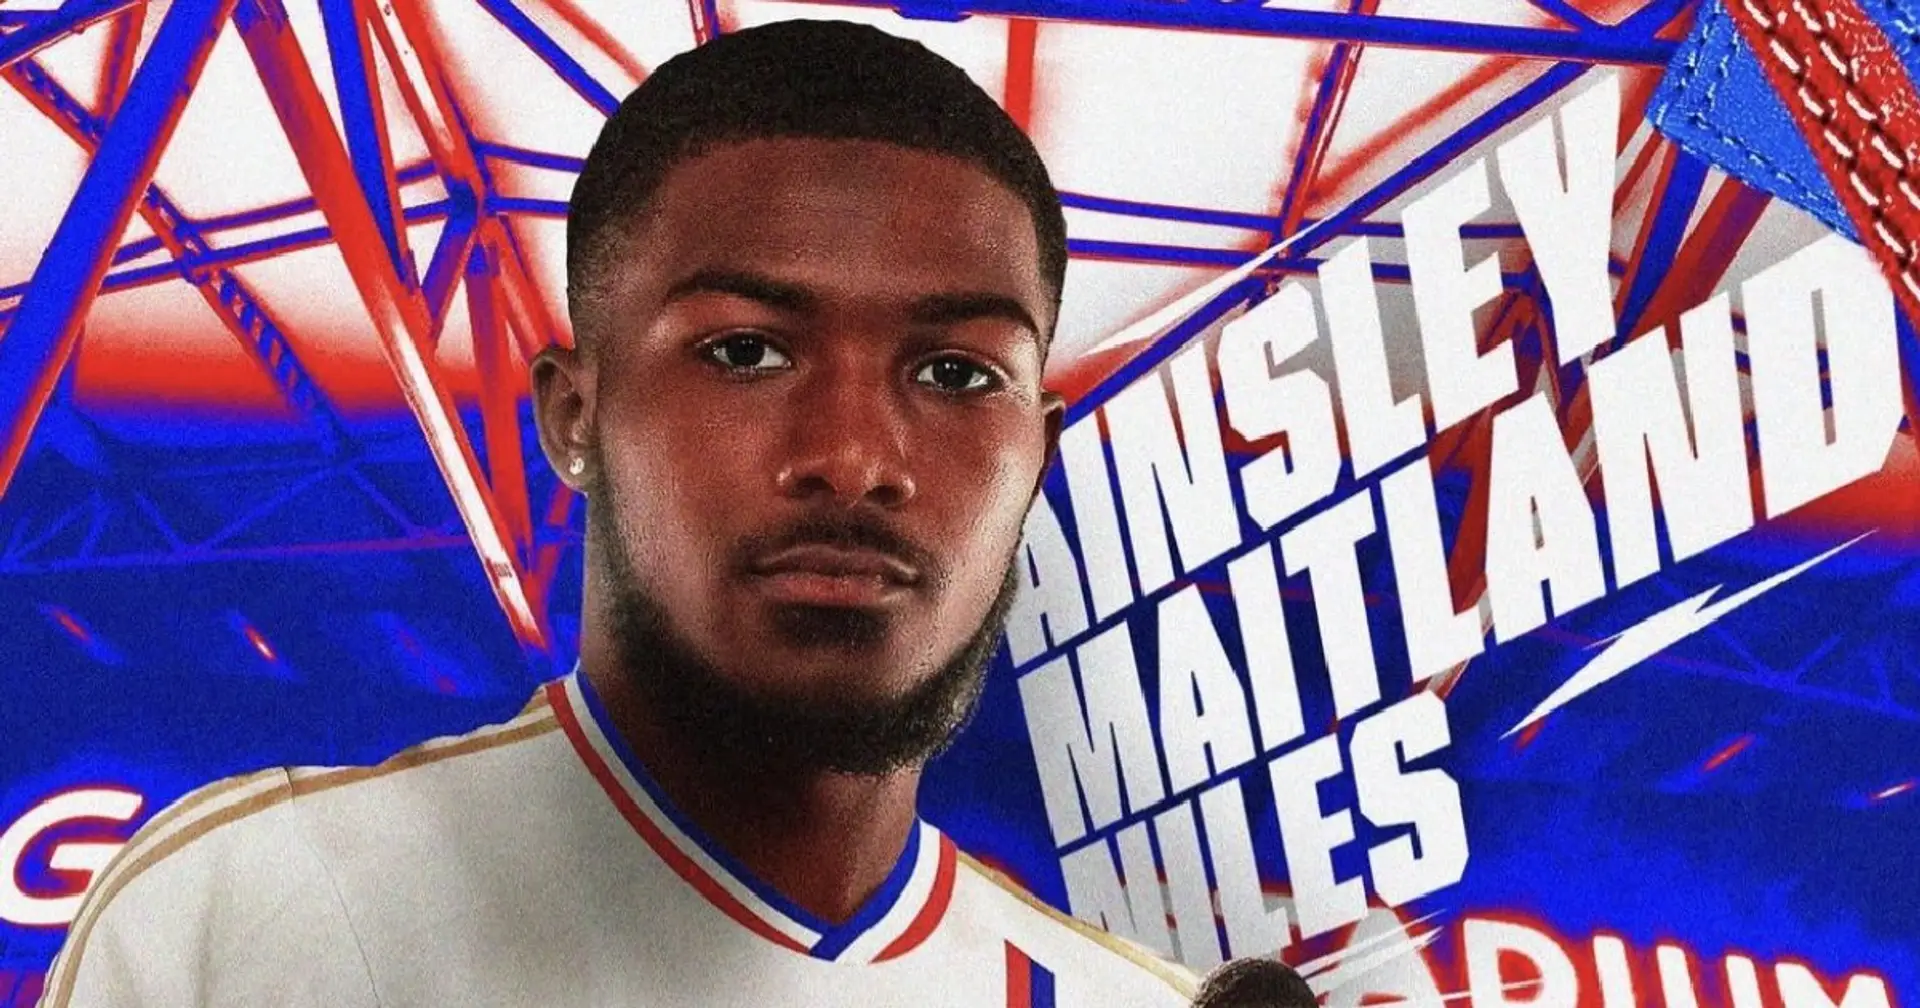 Maitland-Niles gets new club after 20 years at Arsenal, reunited with former teammate